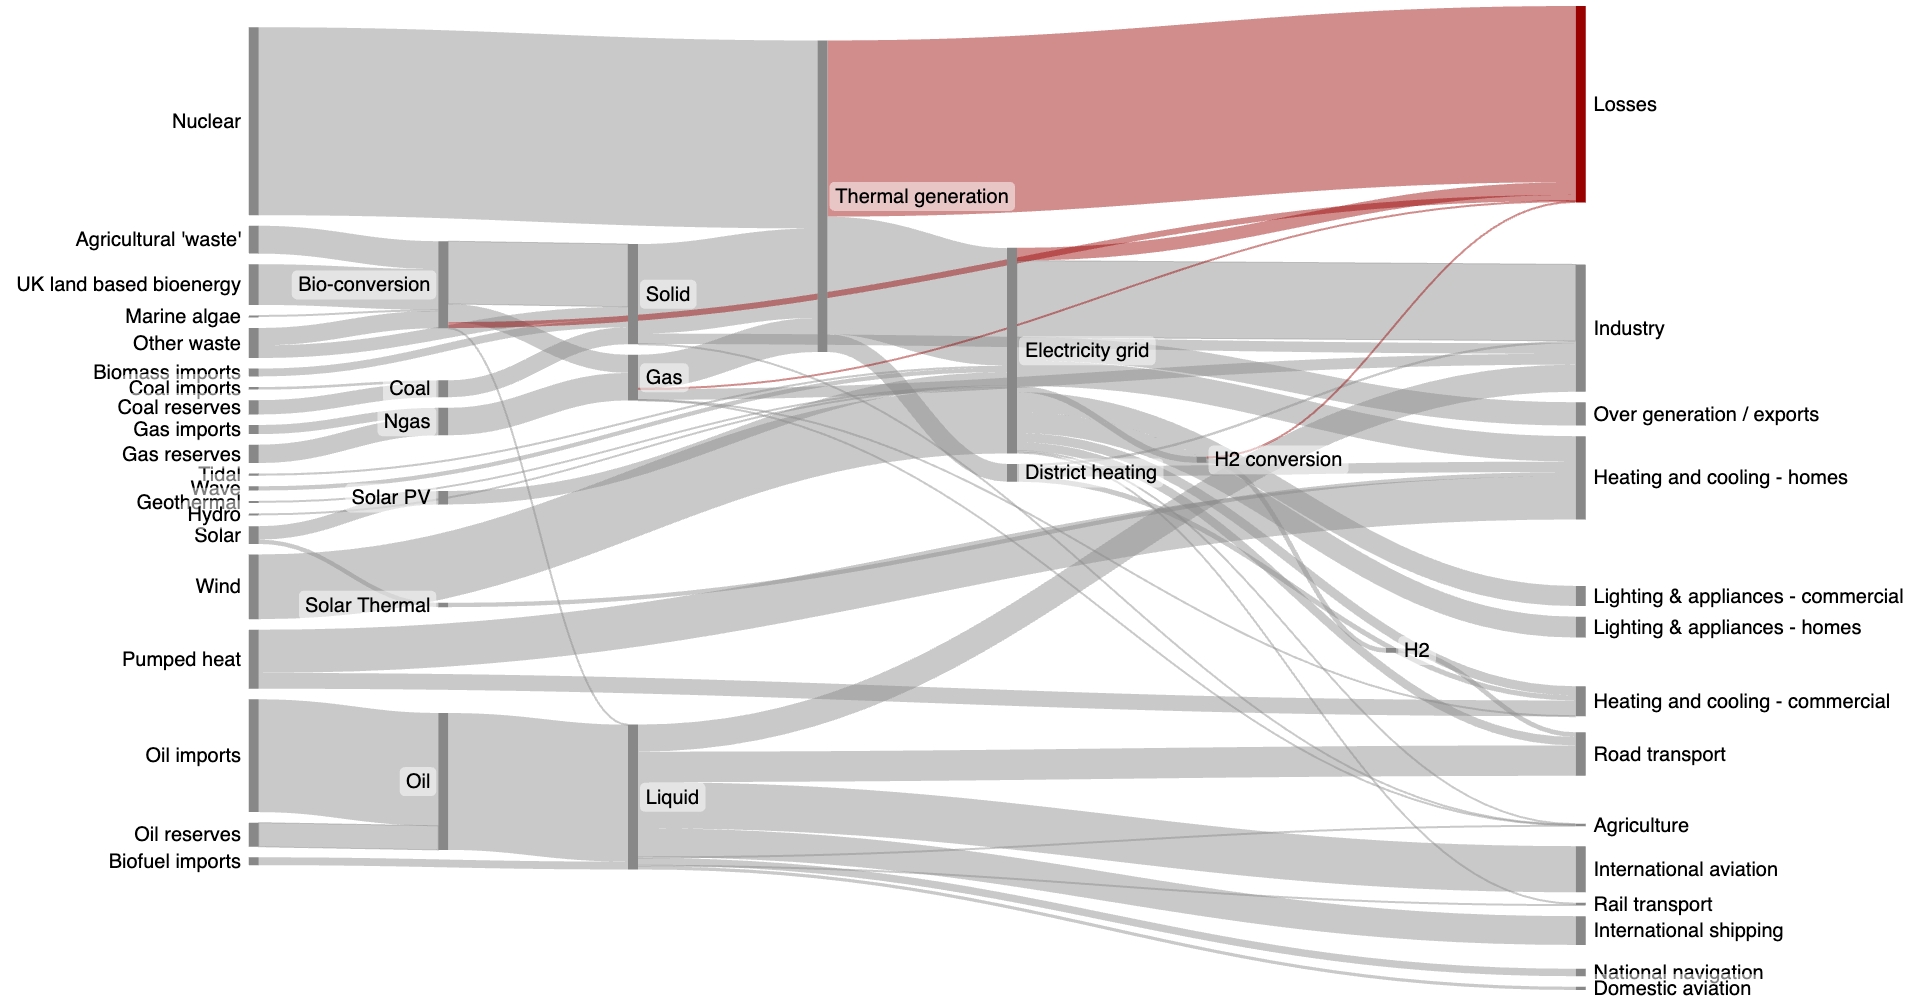 Complex Sankey diagram showing energy flows of many kinds. This diagram depicts a potential scenario for UK energy production and consumption in 2050. The largest inputs represent Nuclear power (roughly 839 TWh) and Oil imports (504TWh). The largest output is the Losses path (878 TWh).